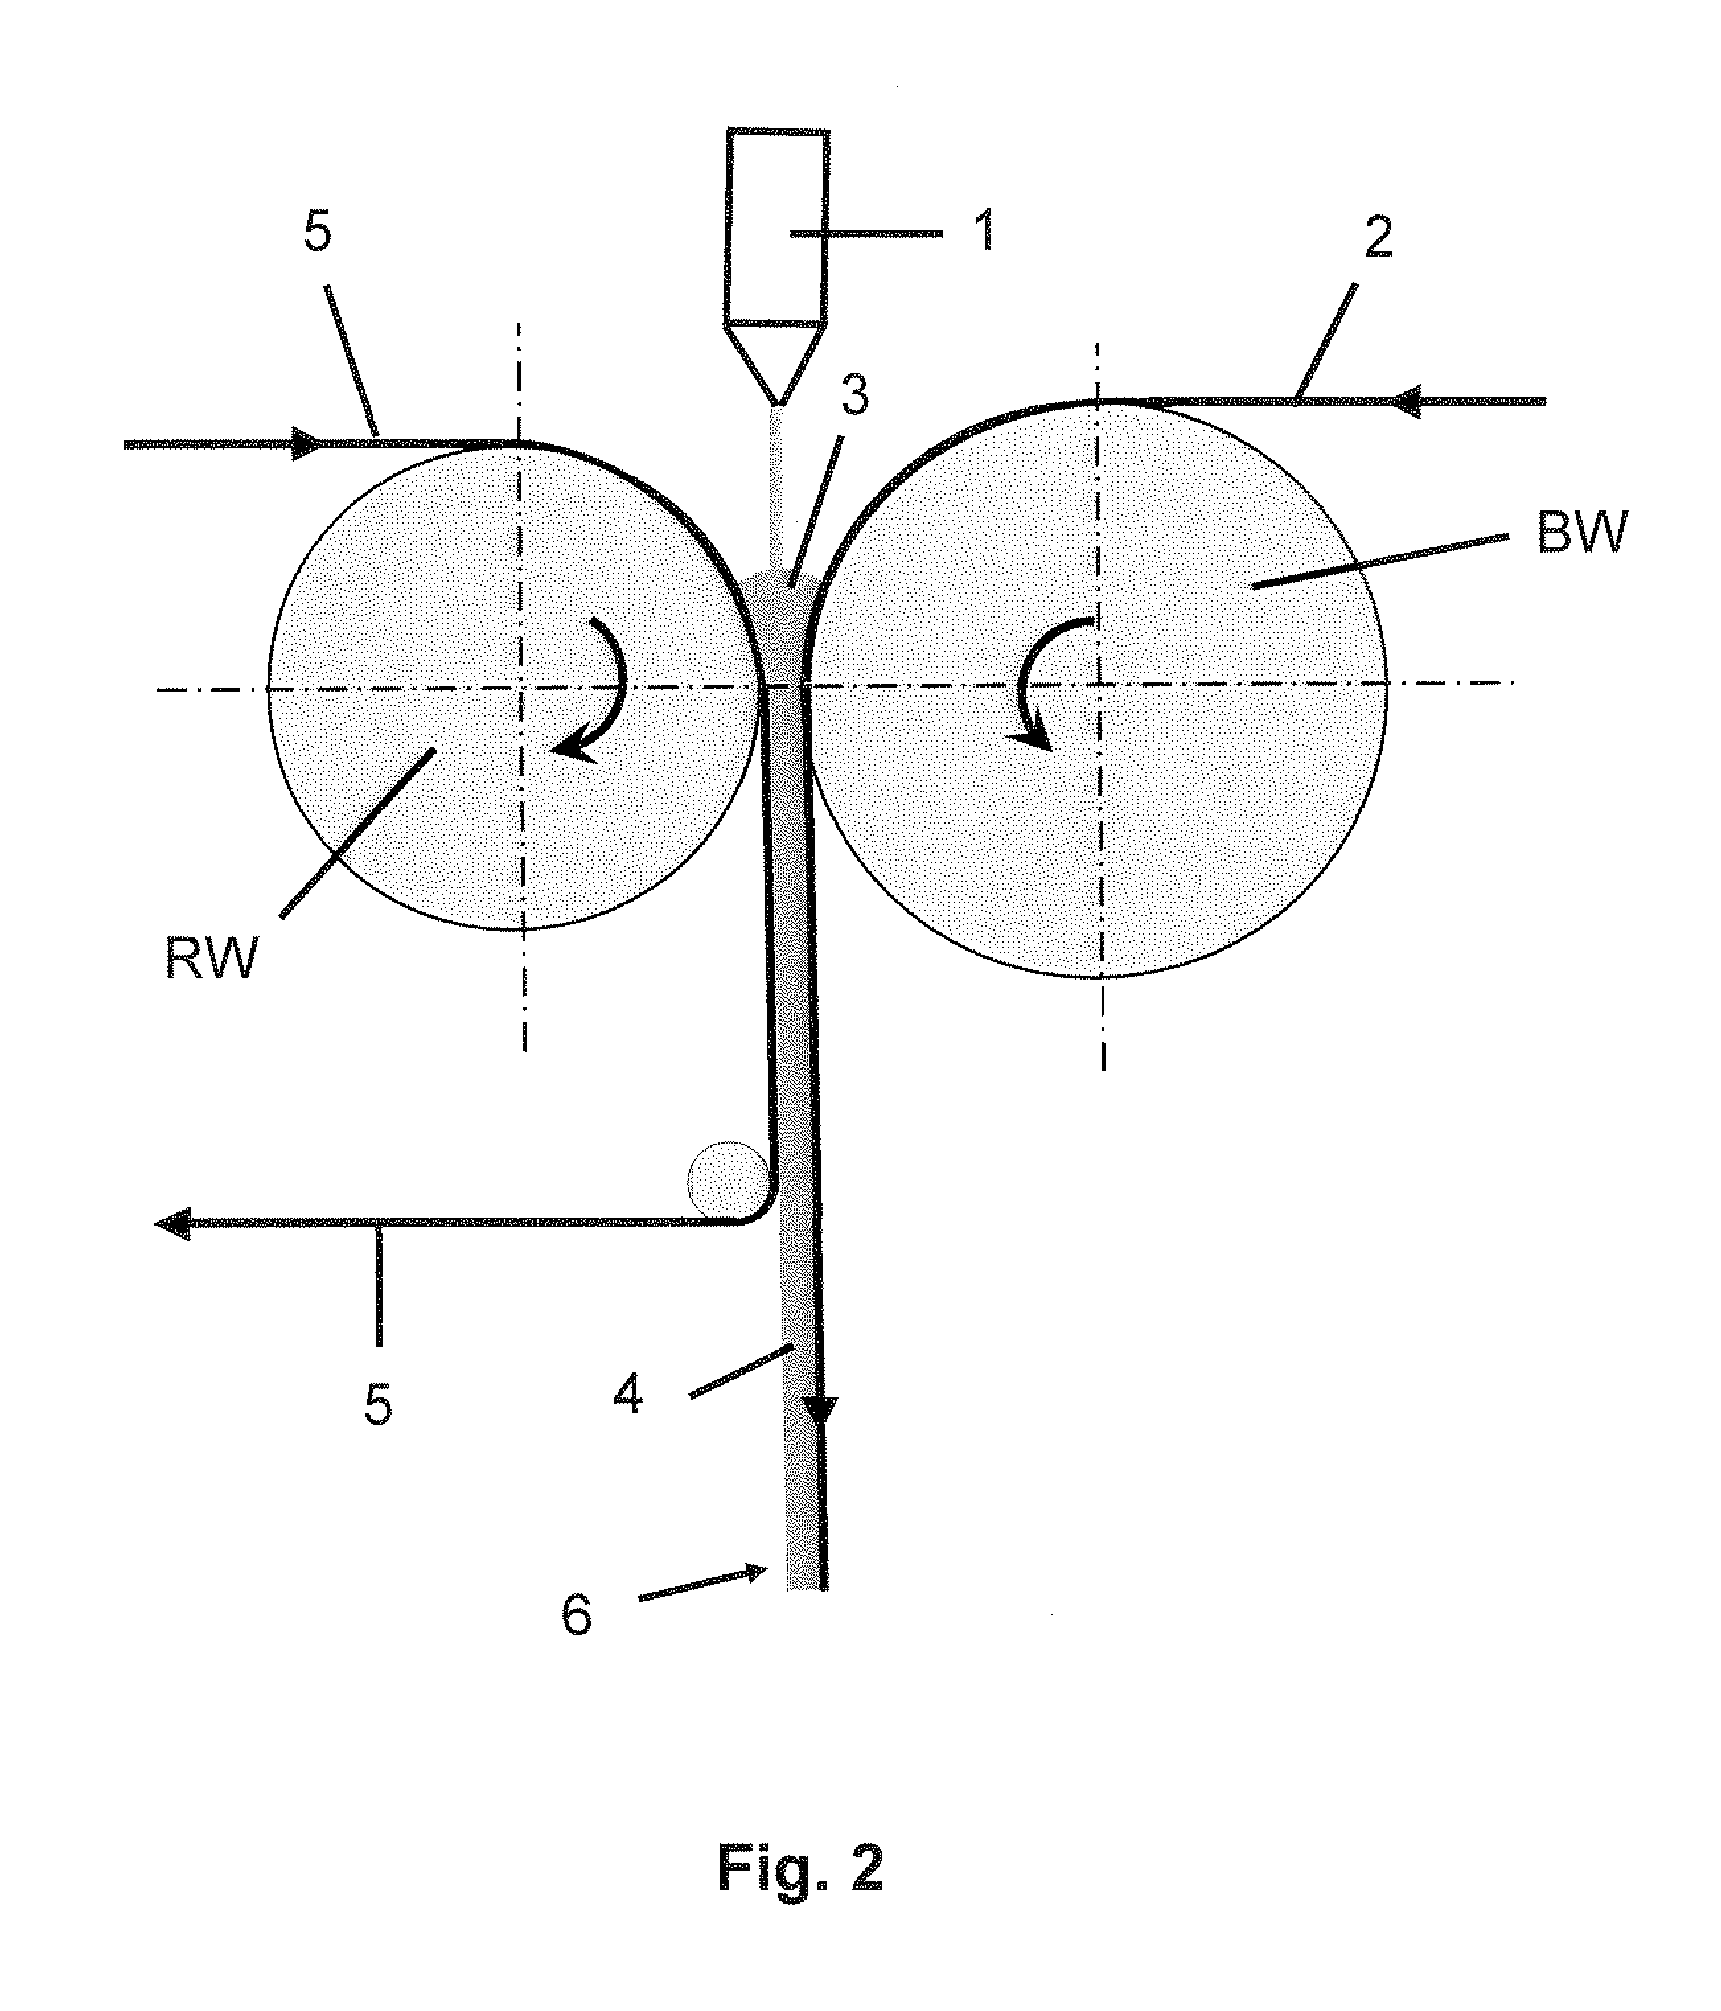 Method for producing an adhesive strip comprising a thermally cross-linked acrylate hot-melt adhesive layer